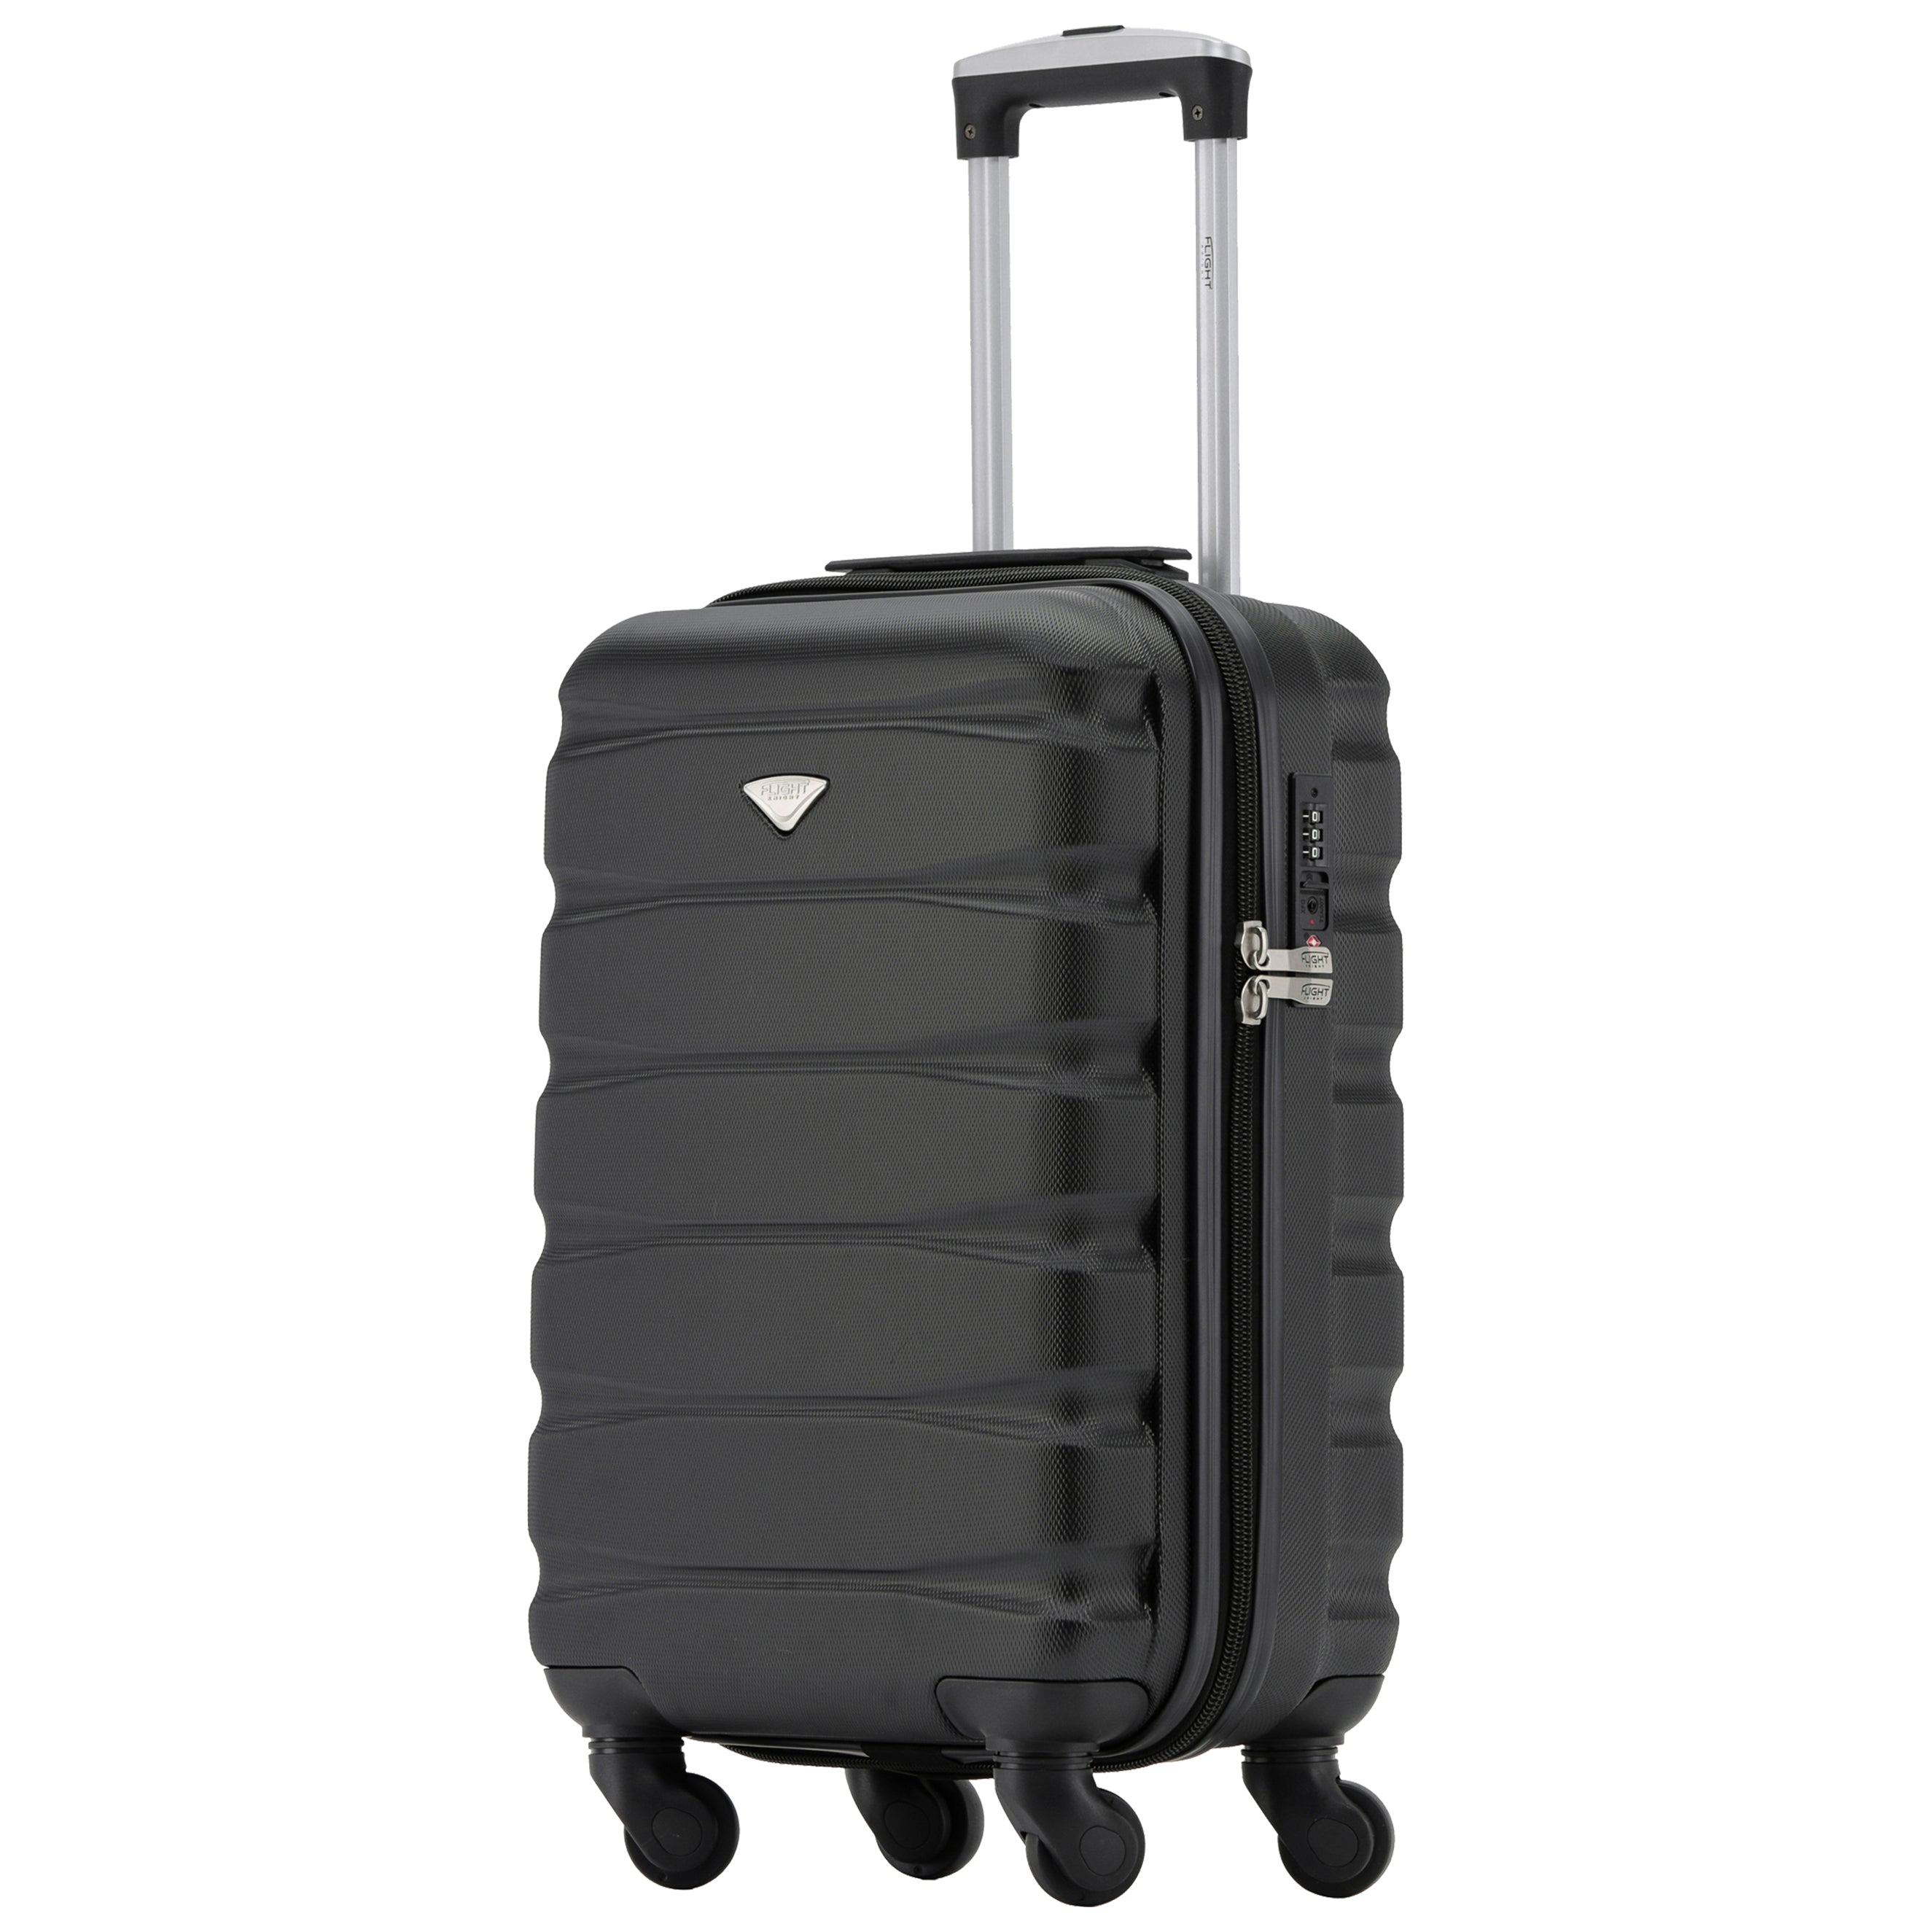 Maleta Cabina 55x40x20 Equipaje, Cabin Trolley Suitcases Abs